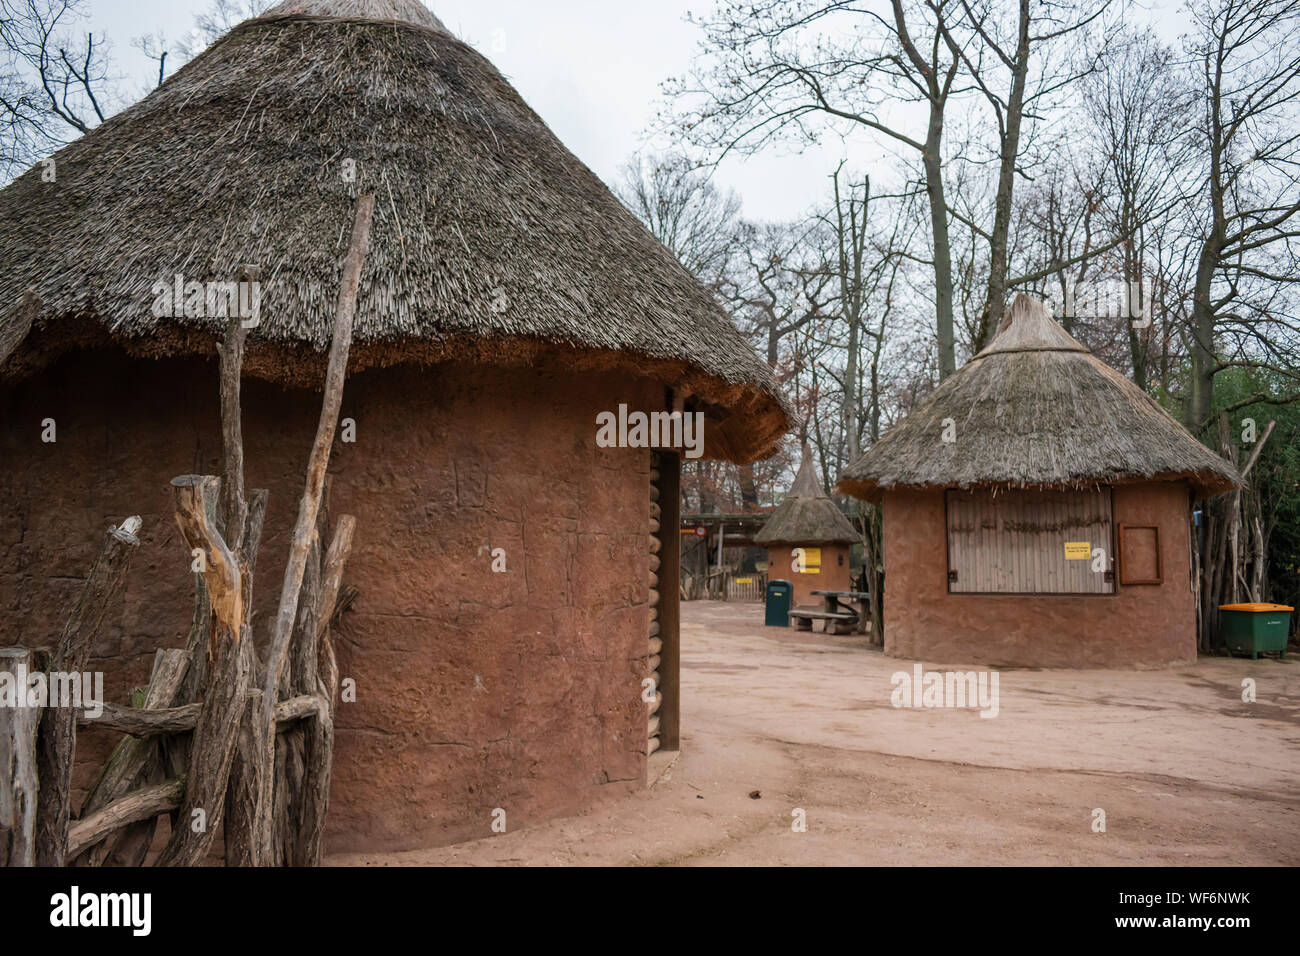 Leipzig, Germany - December 2018: African Continent Section. Stock Photo